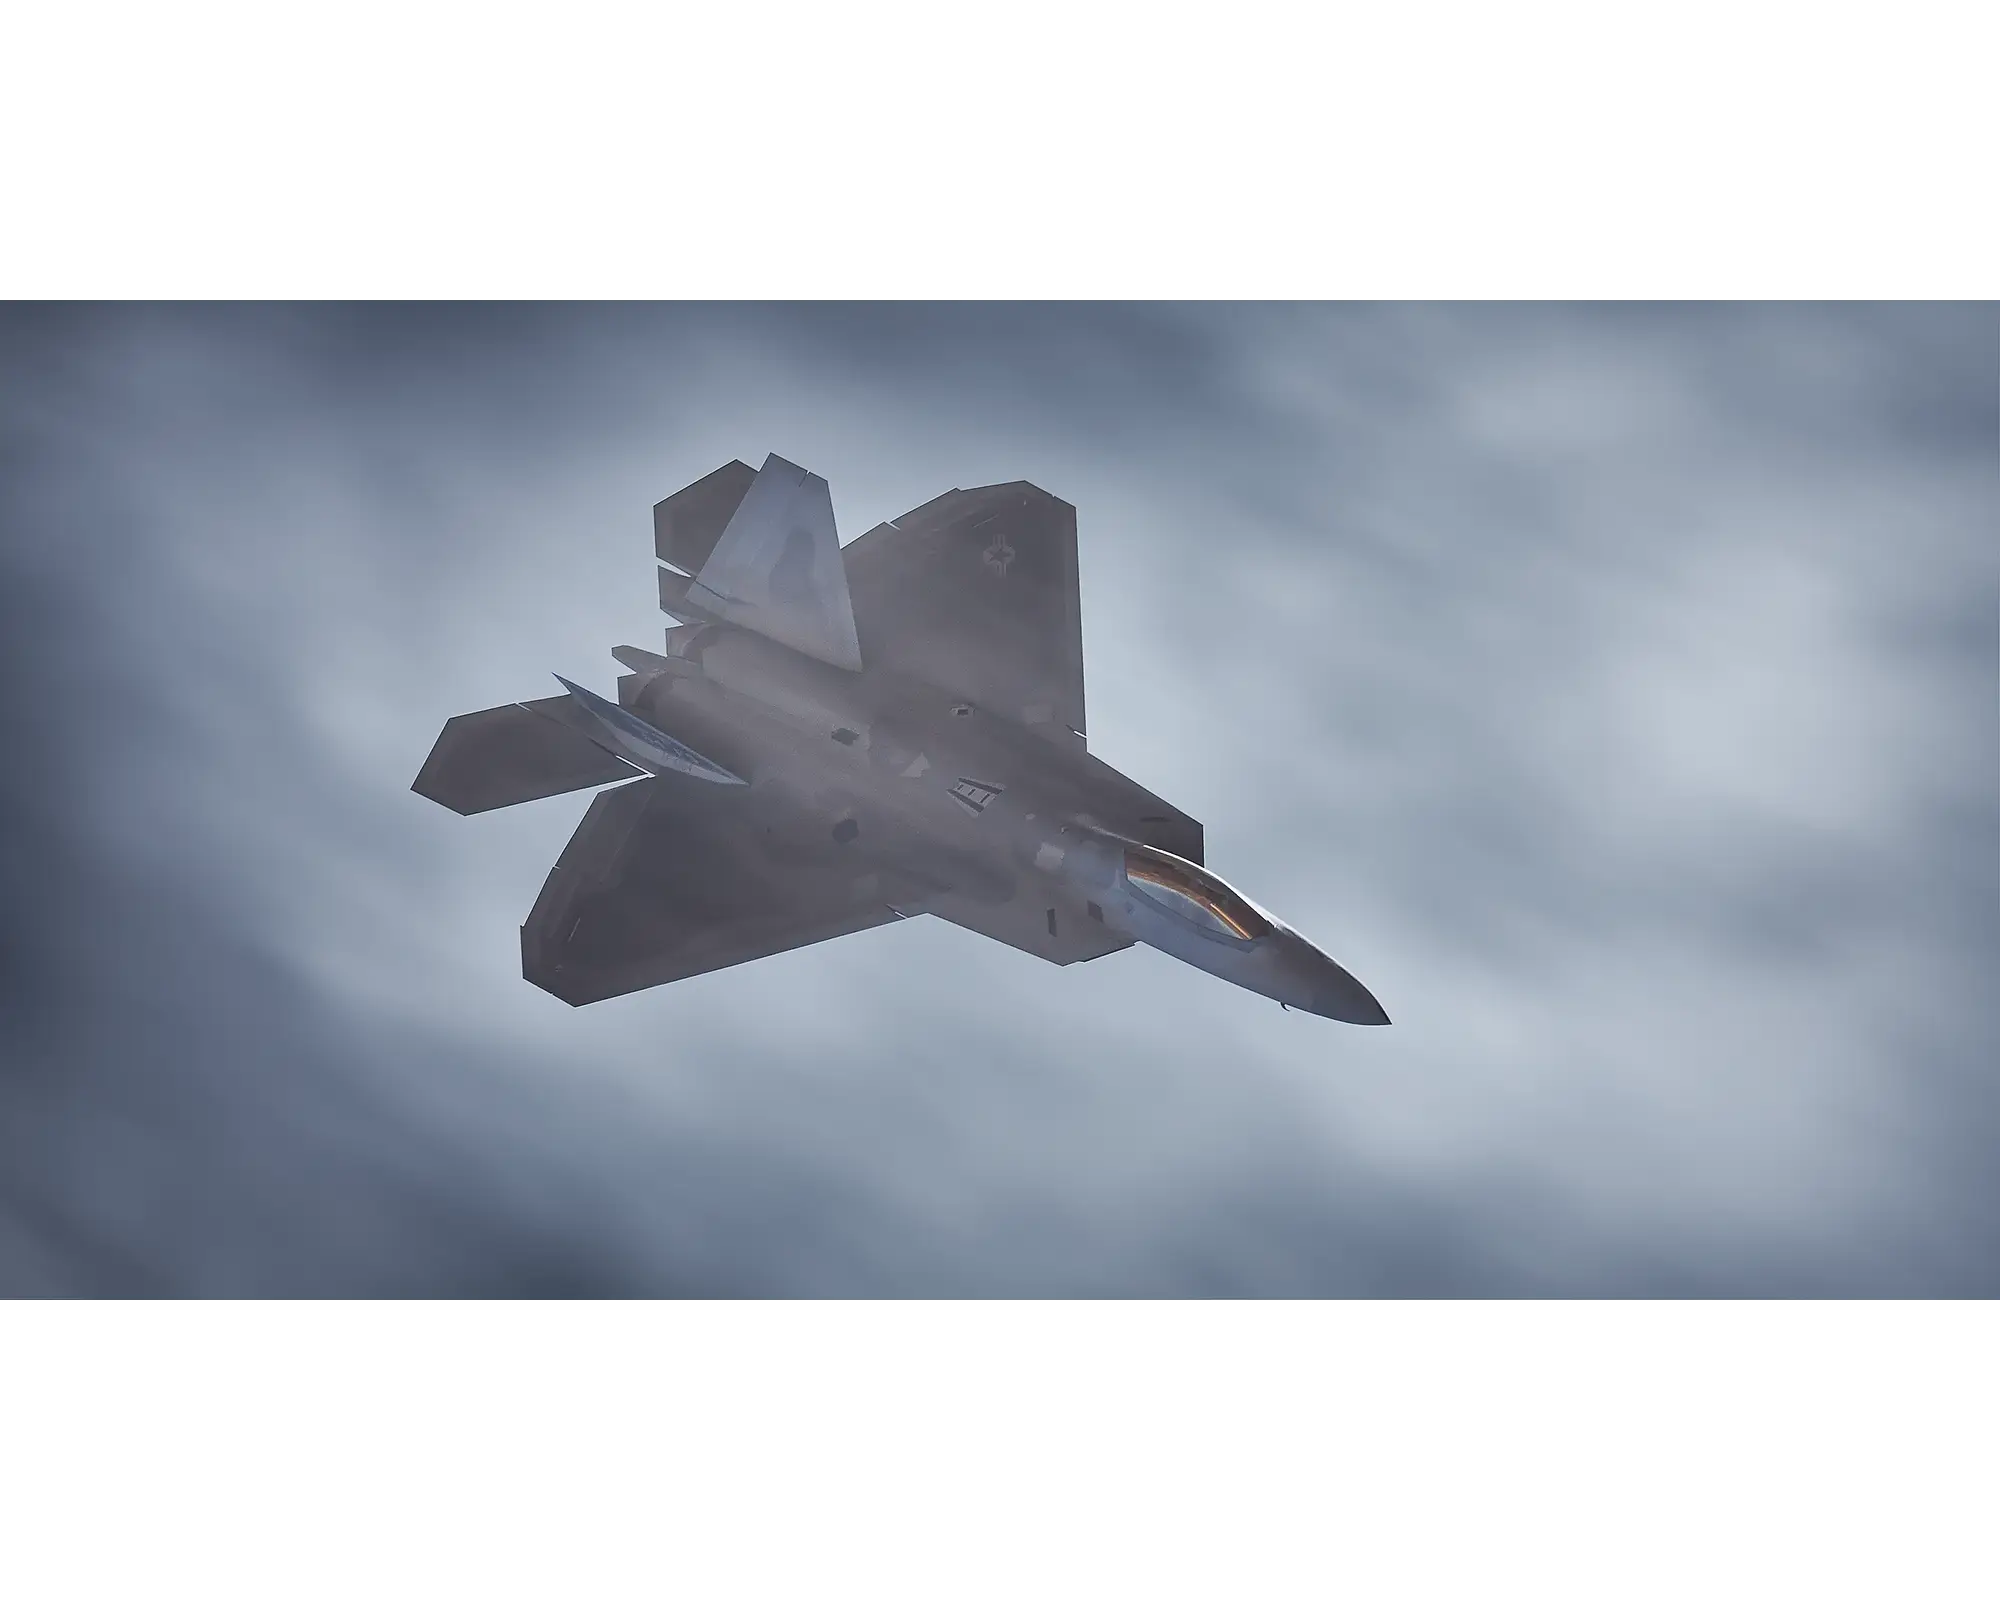 Stealth Fighter. United STates Air Force F-22 Raptor flying next to clouds.